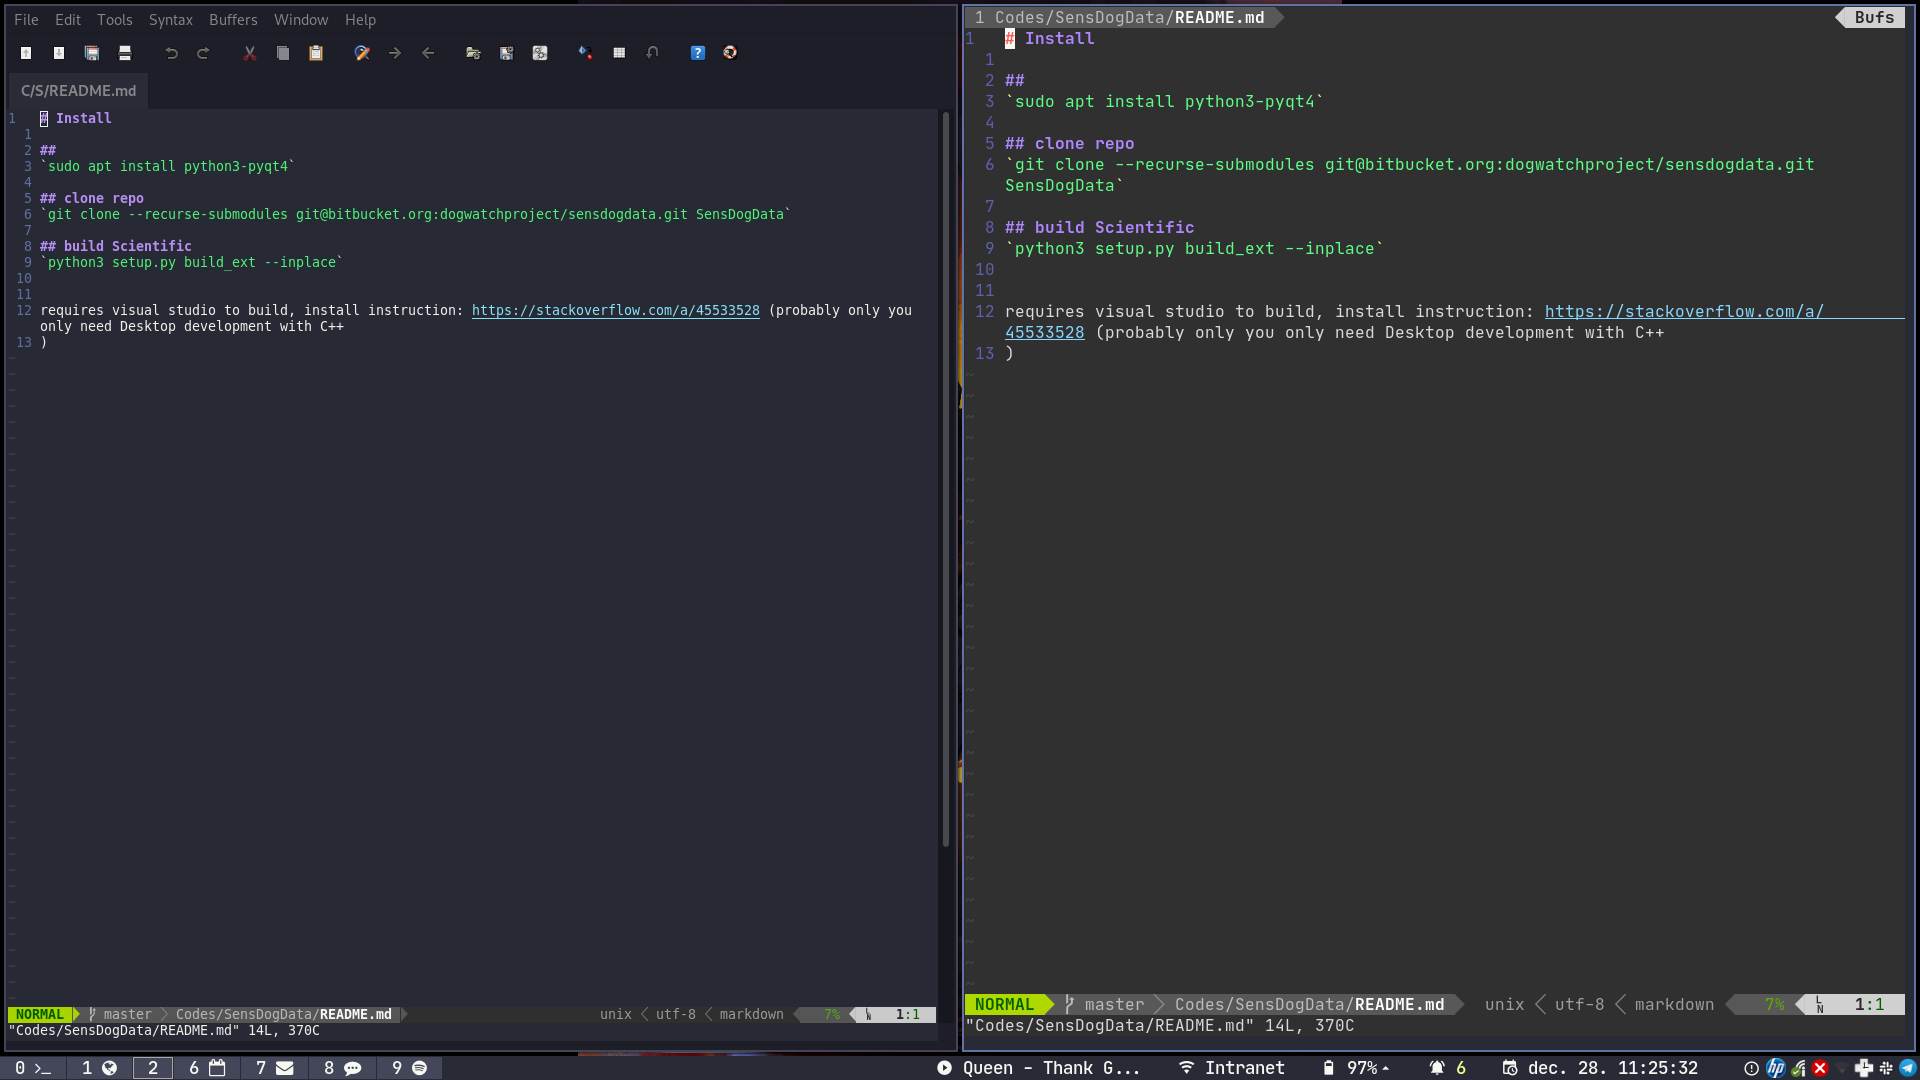 Graphical vim on the left, terminal vim on the right.